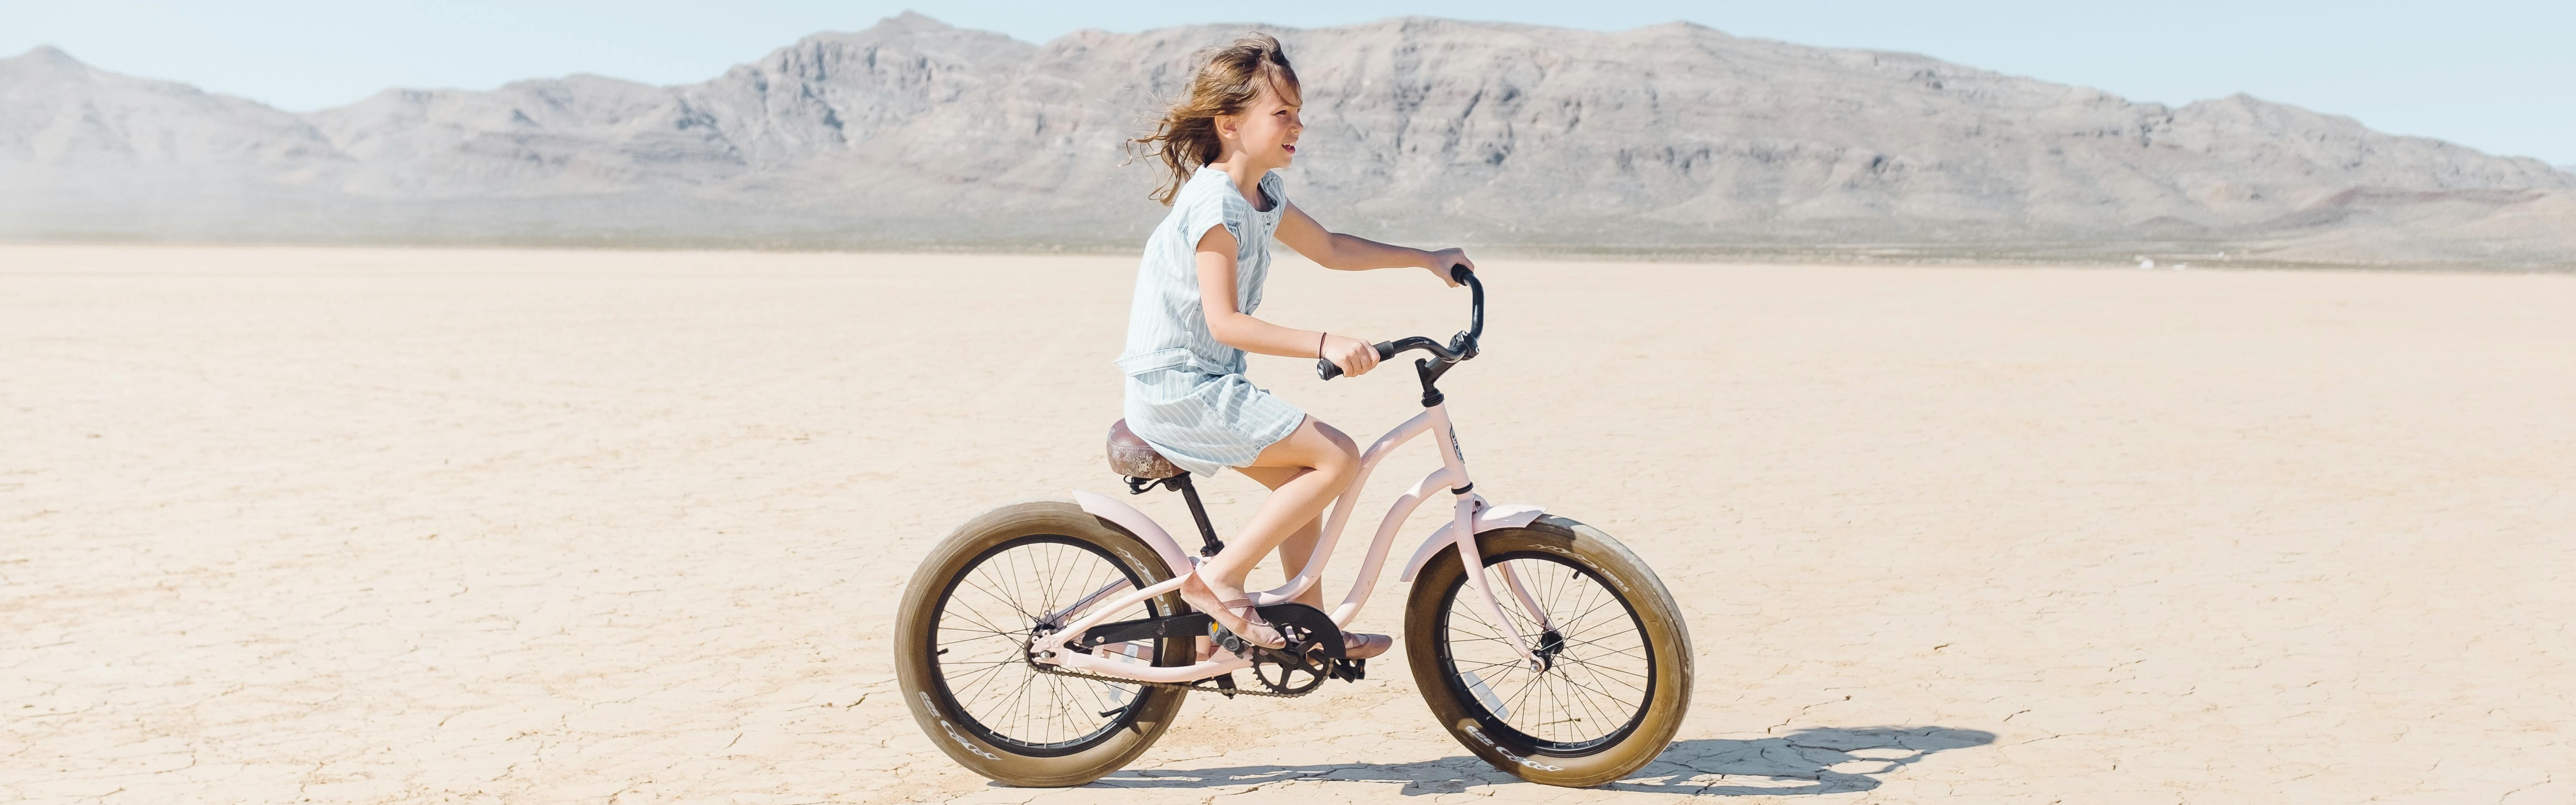 A girl rides a bike across a dried lake bed in a desert ecosystem. 